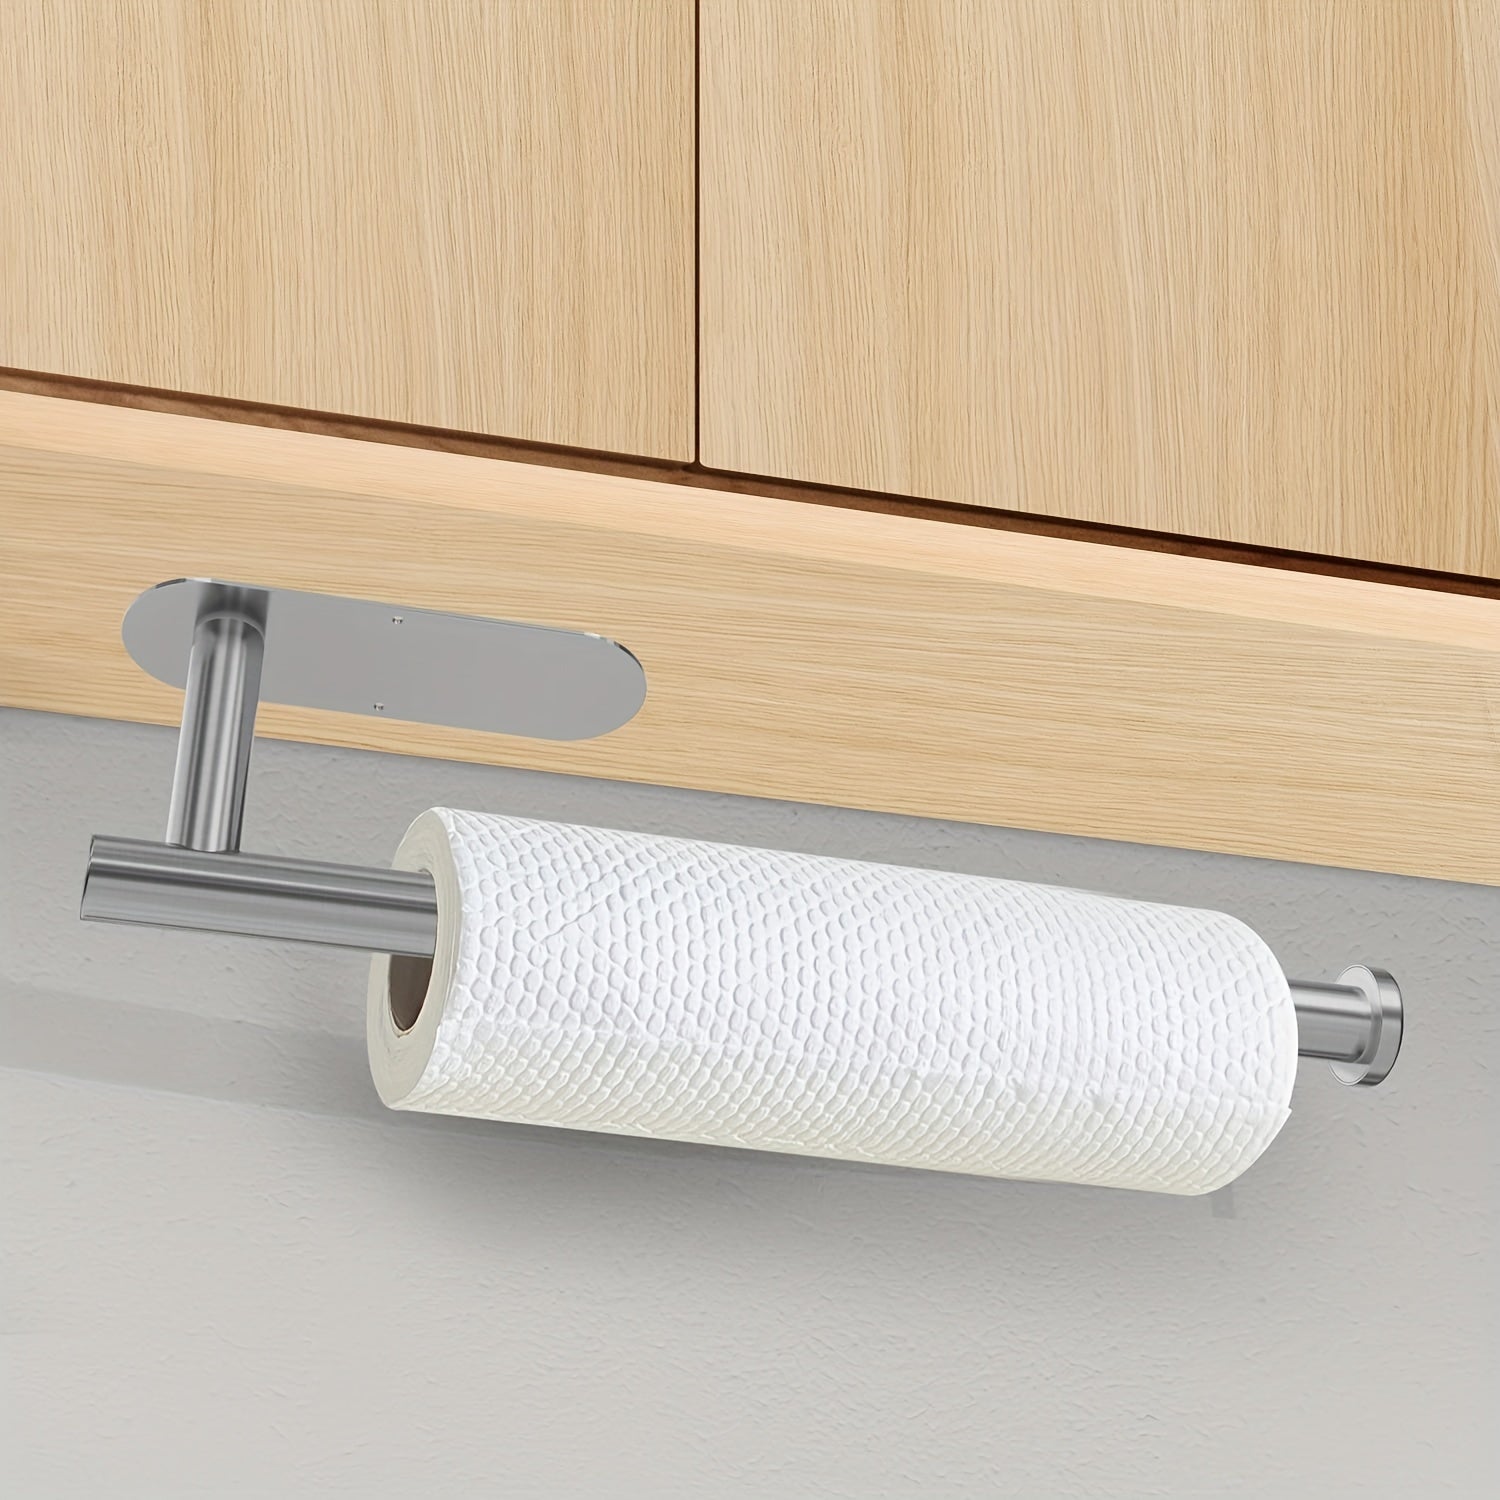 1pc, Paper Towel Holders, Paper Towels Rolls, For Kitchen,Paper Towels Bulk, Self-Adhesive Under Cabinet, Both Available In Adhesive And Screws, Stainless Steel Paper Towel Holder